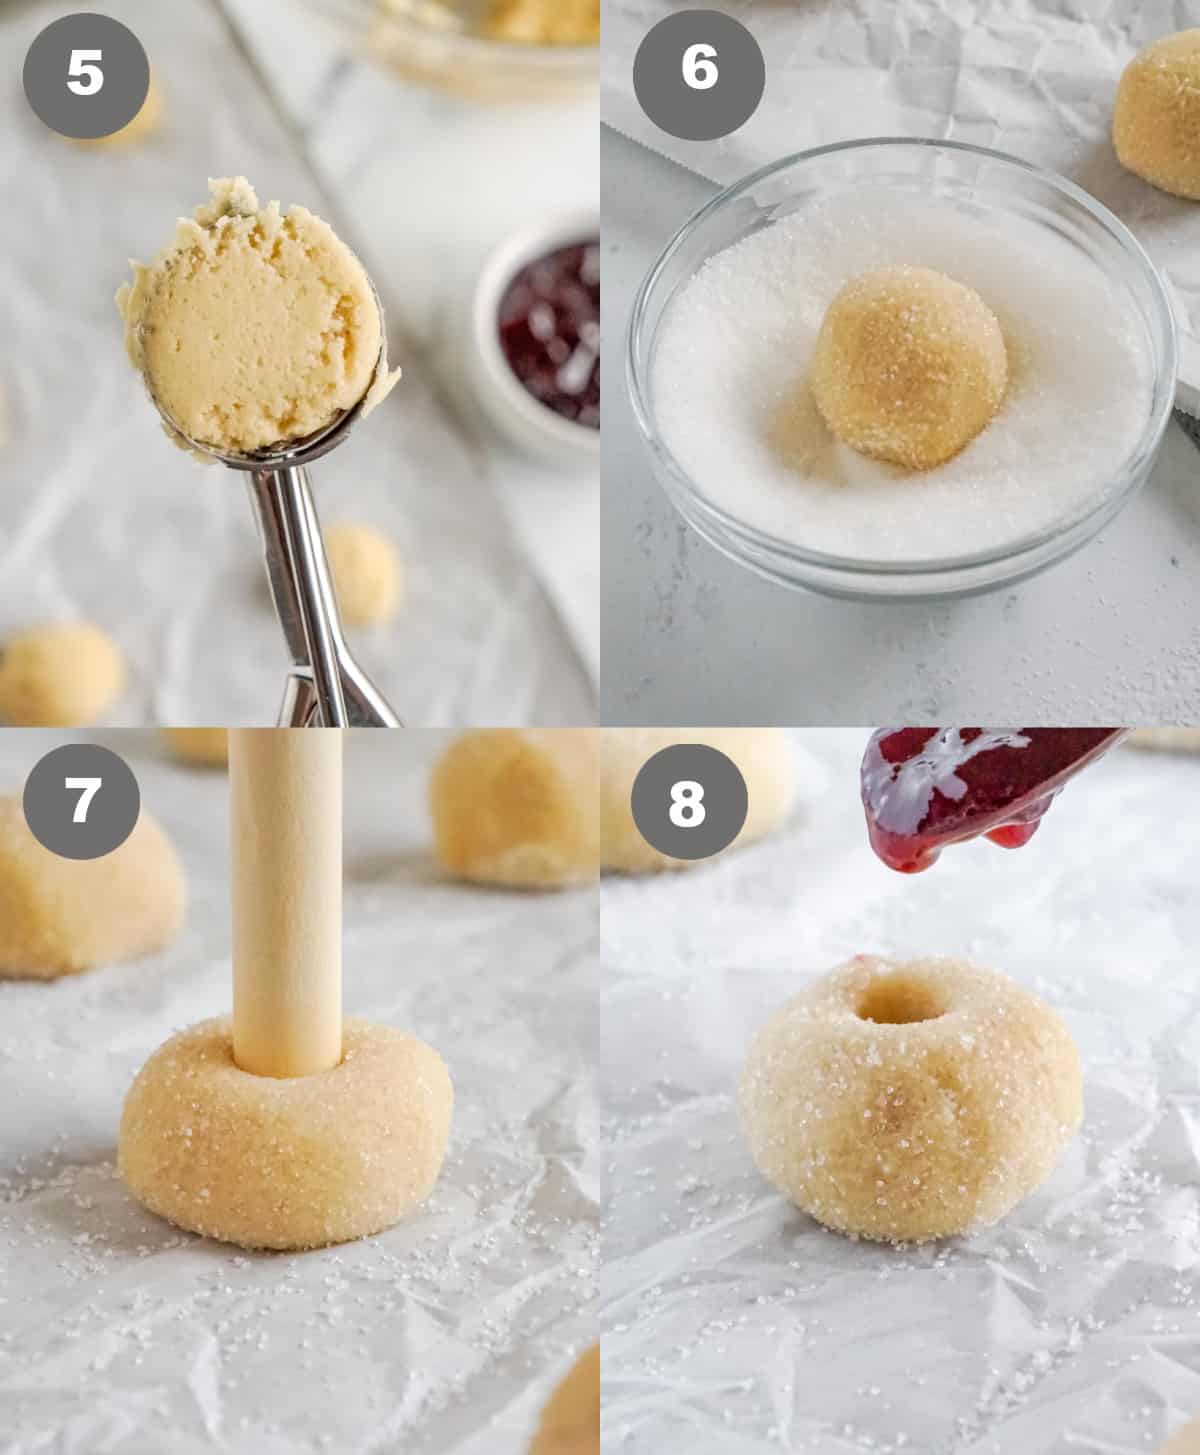 Four process photos. First one, a cookie scoop picking up a ball. Second one, the dough ball being rolled in a small bowl of sugar. Third one, a wooden dowel pushing a hole into the center. Fourth one, raspberry jam being added into the hole.